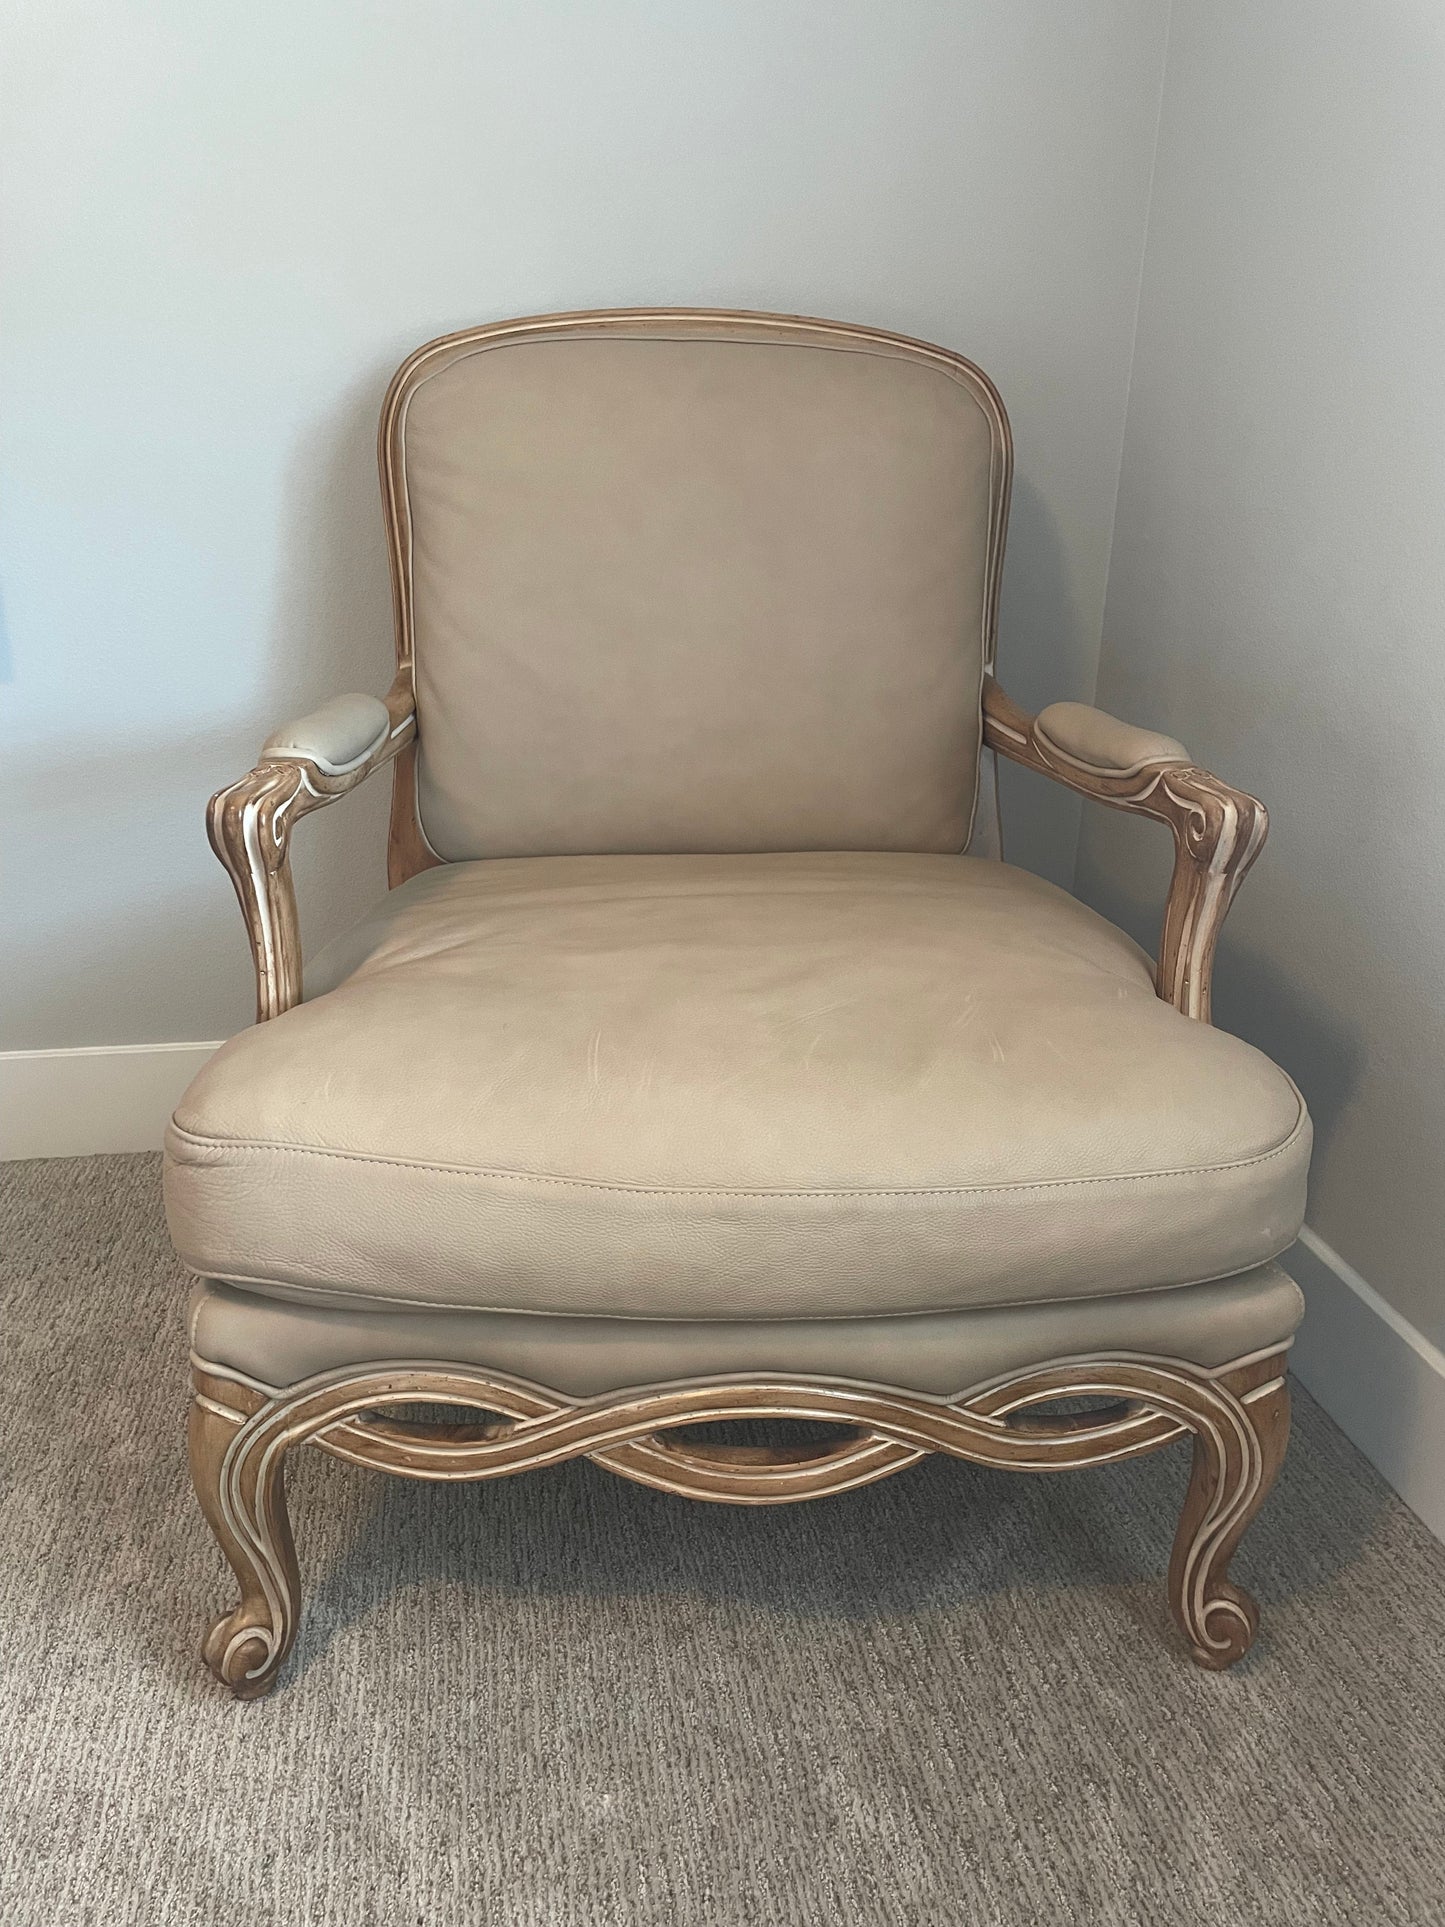 Vintage Sam Moore Ivory Leather French Bergere Chair 38 " X 30 " X 36 "